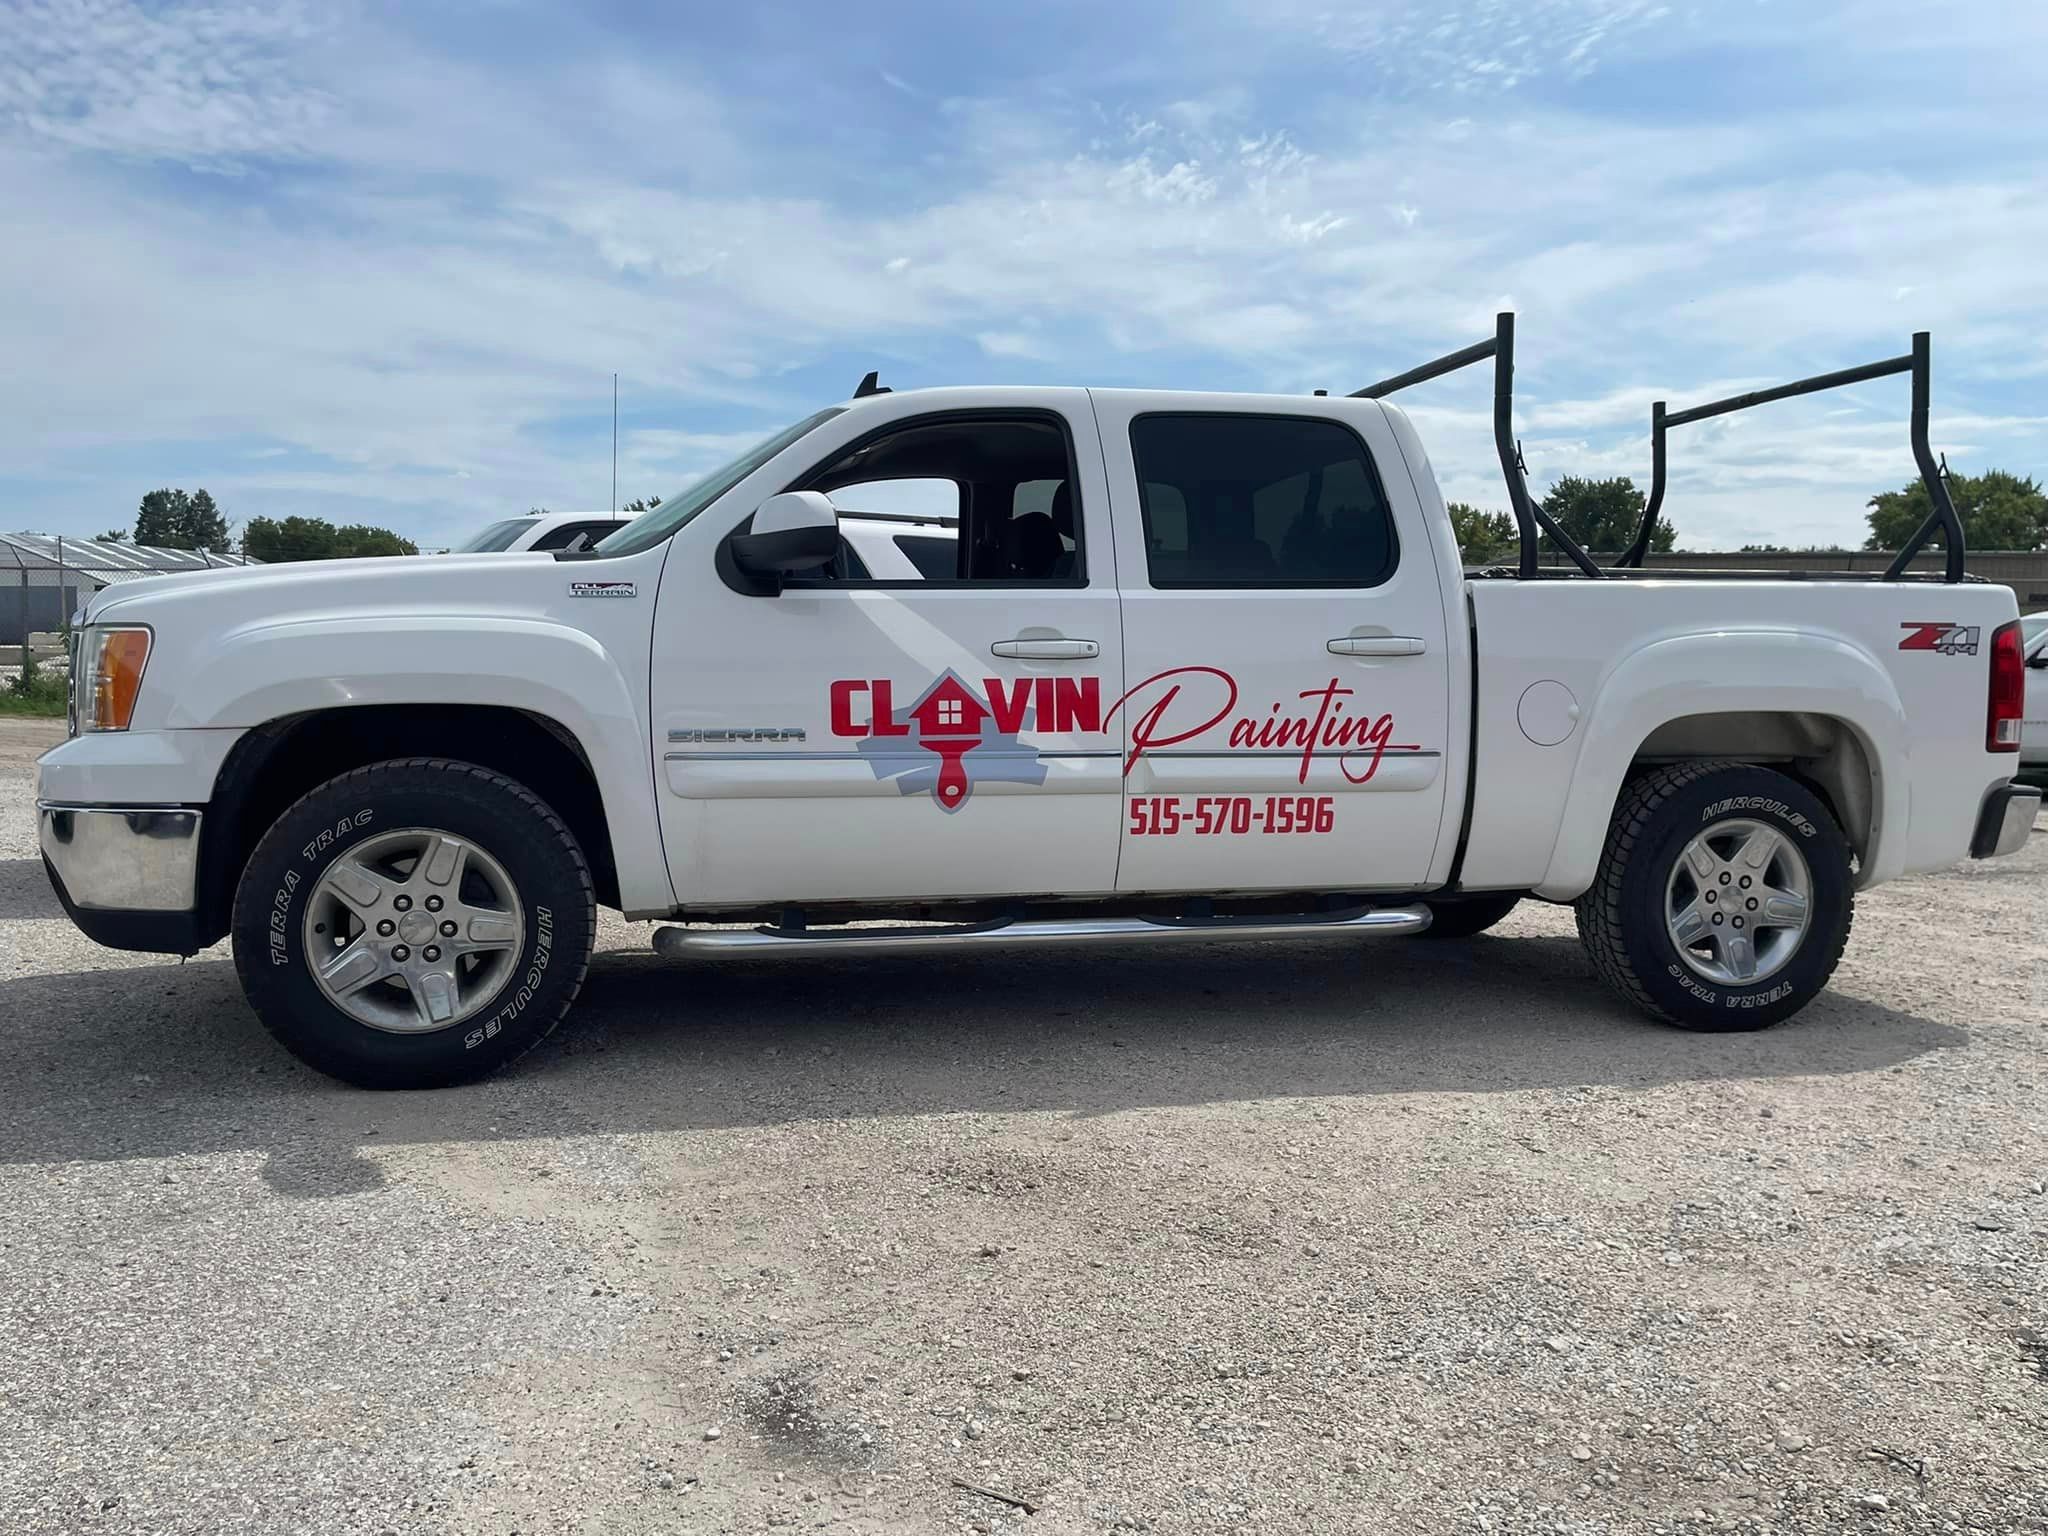 Our Equipment and Team for Clavin Painting in Fort Dodge, Iowa